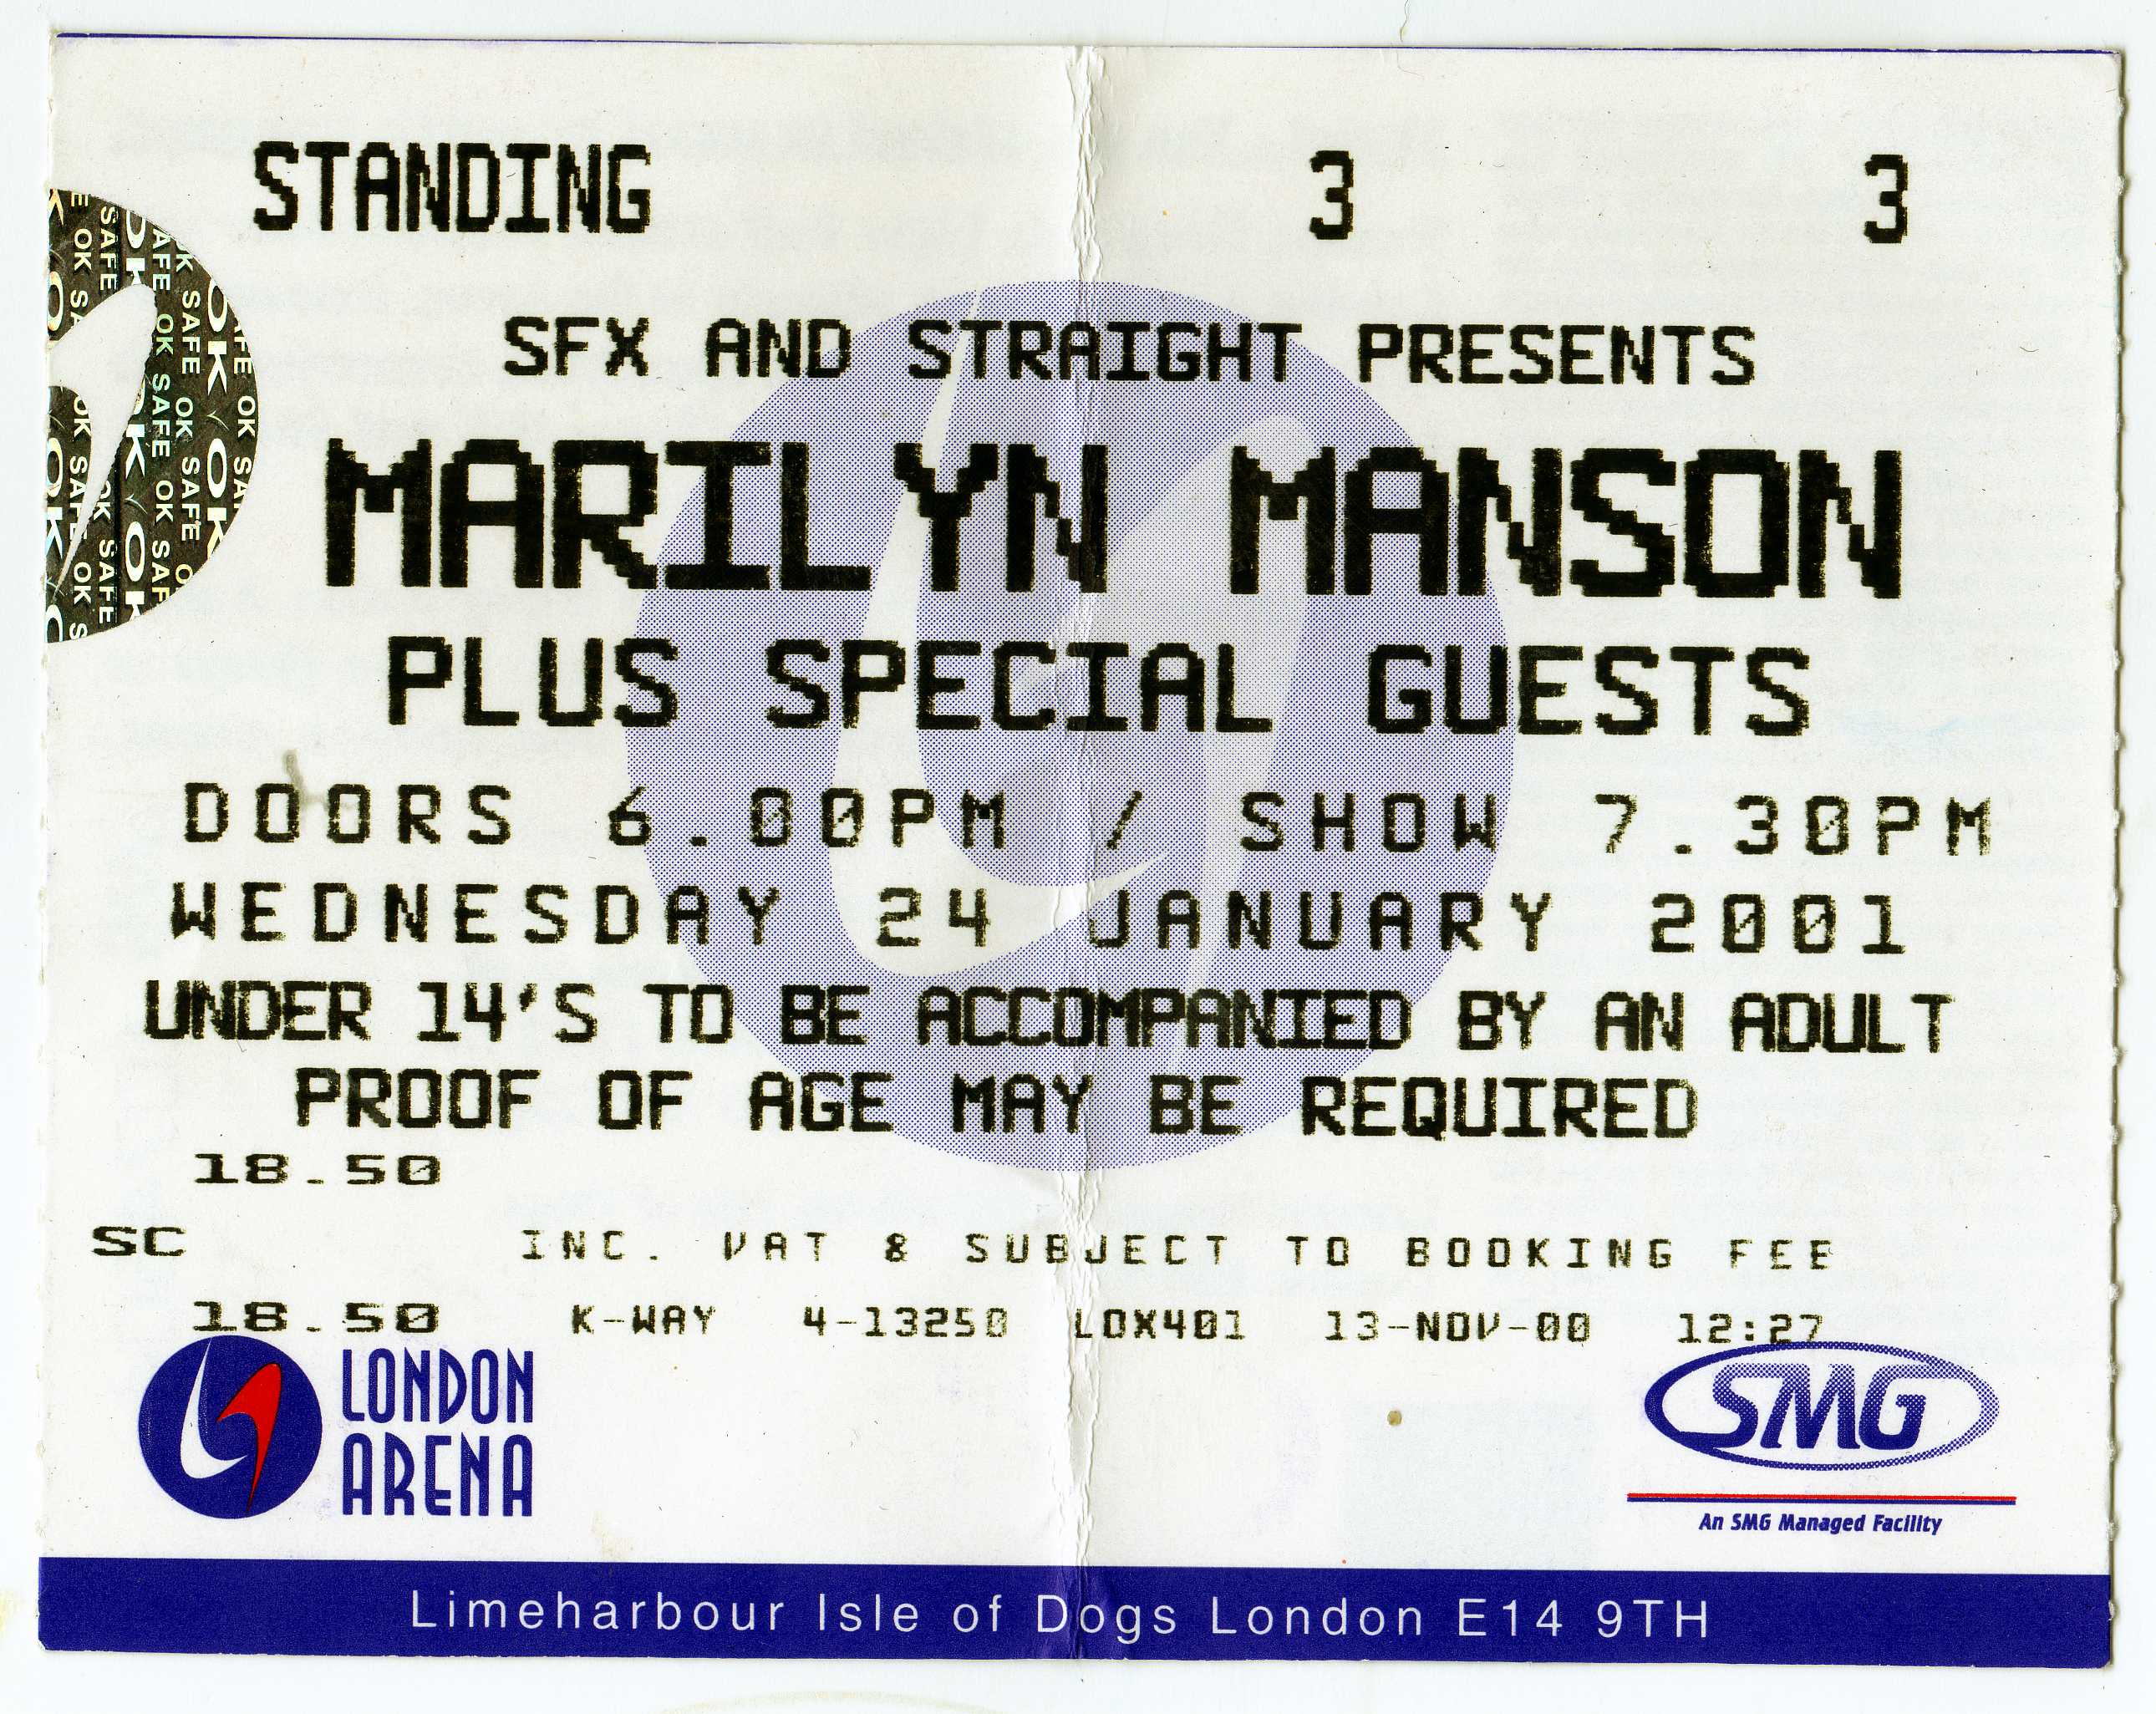 January 24, 2001 performance at Docklands Arena in London, England.